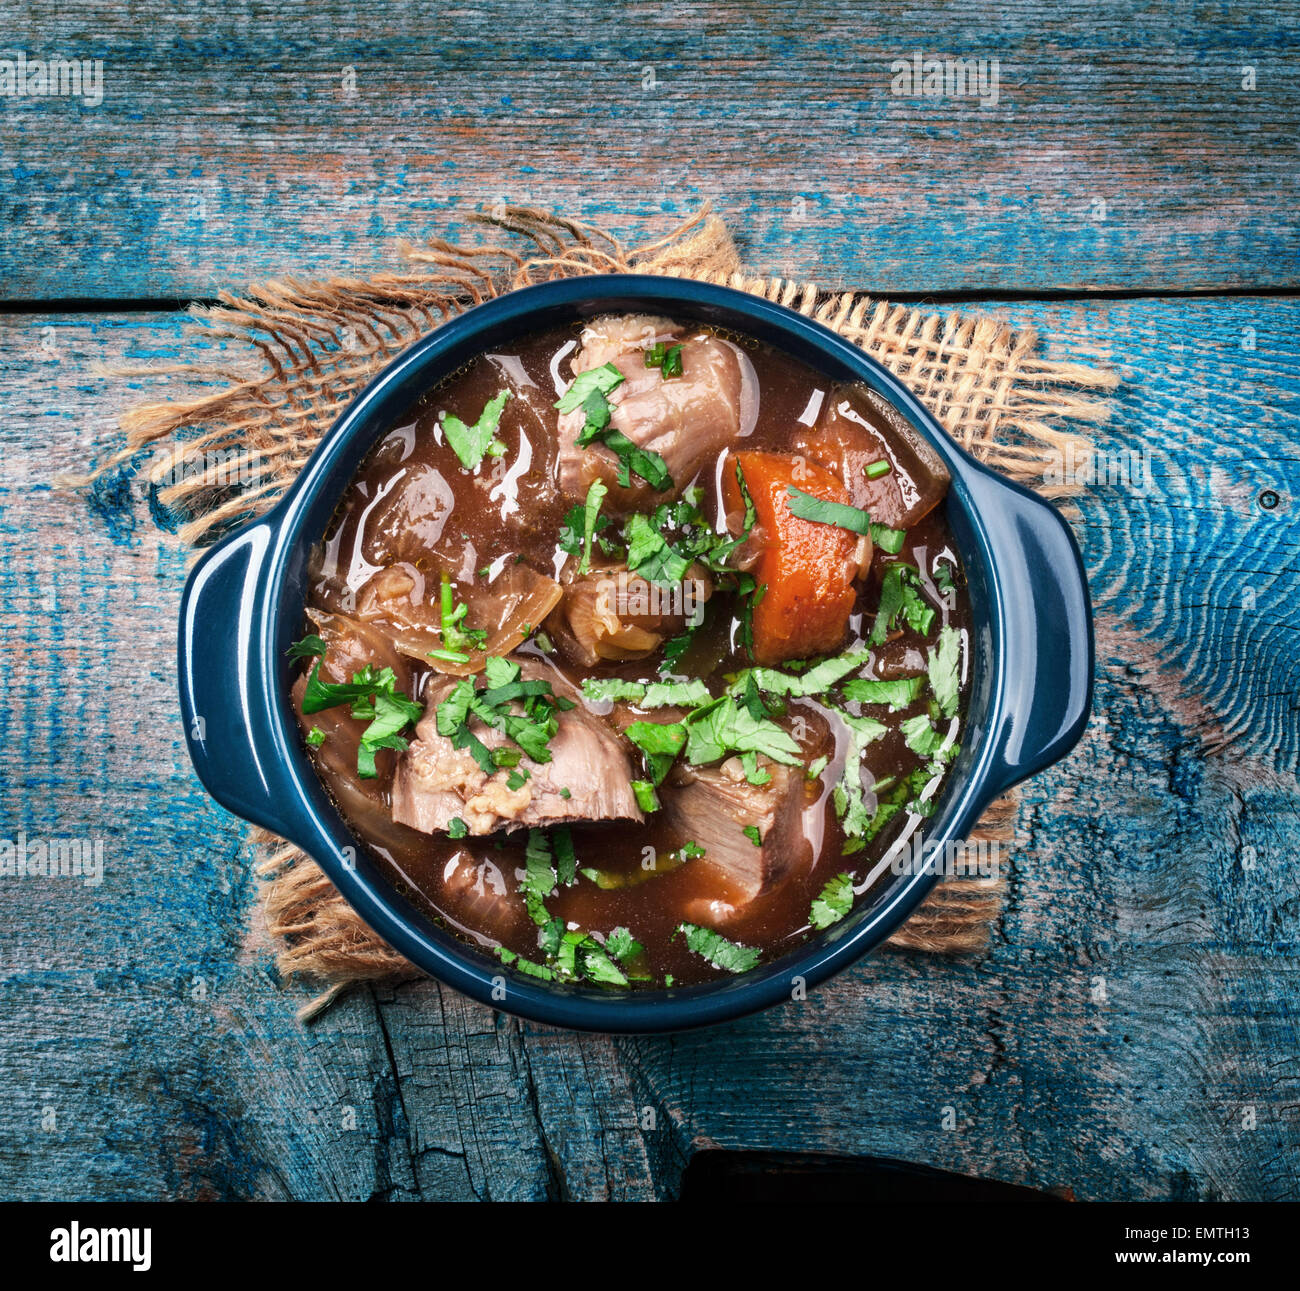 Meat stew with vegetables and herbs on old wooden table Stock Photo